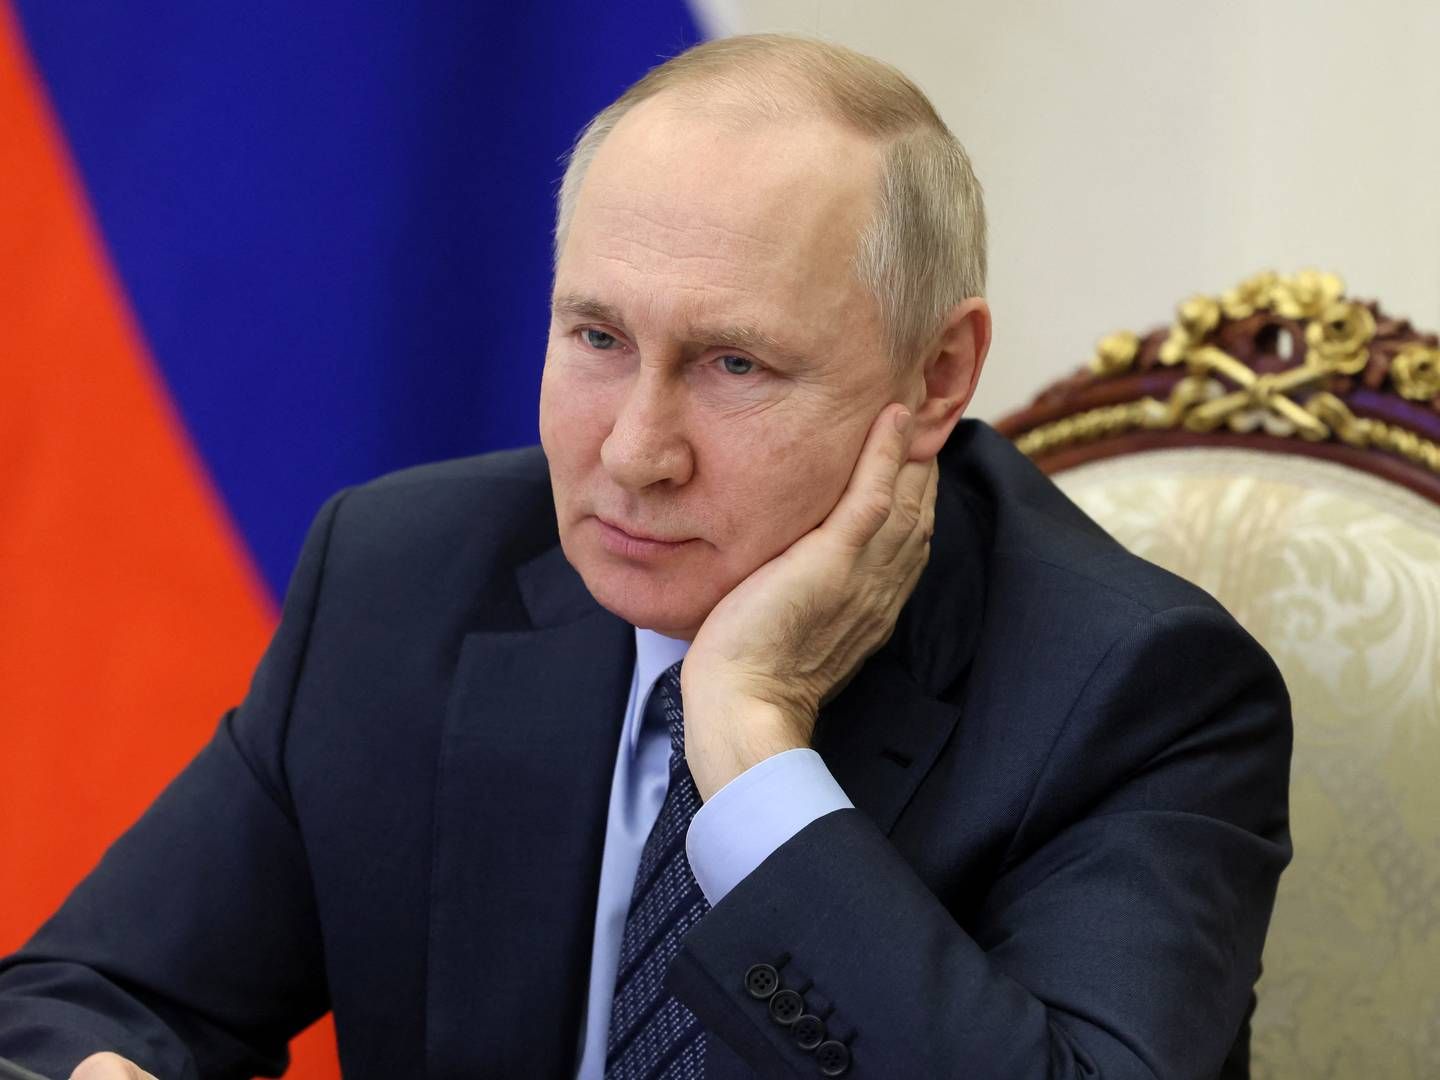 Russian President Vladimir Putin will not accept the price cap imposed on Russian oil by G7 and EU nations. | Photo: Sputnik/Via Reuters